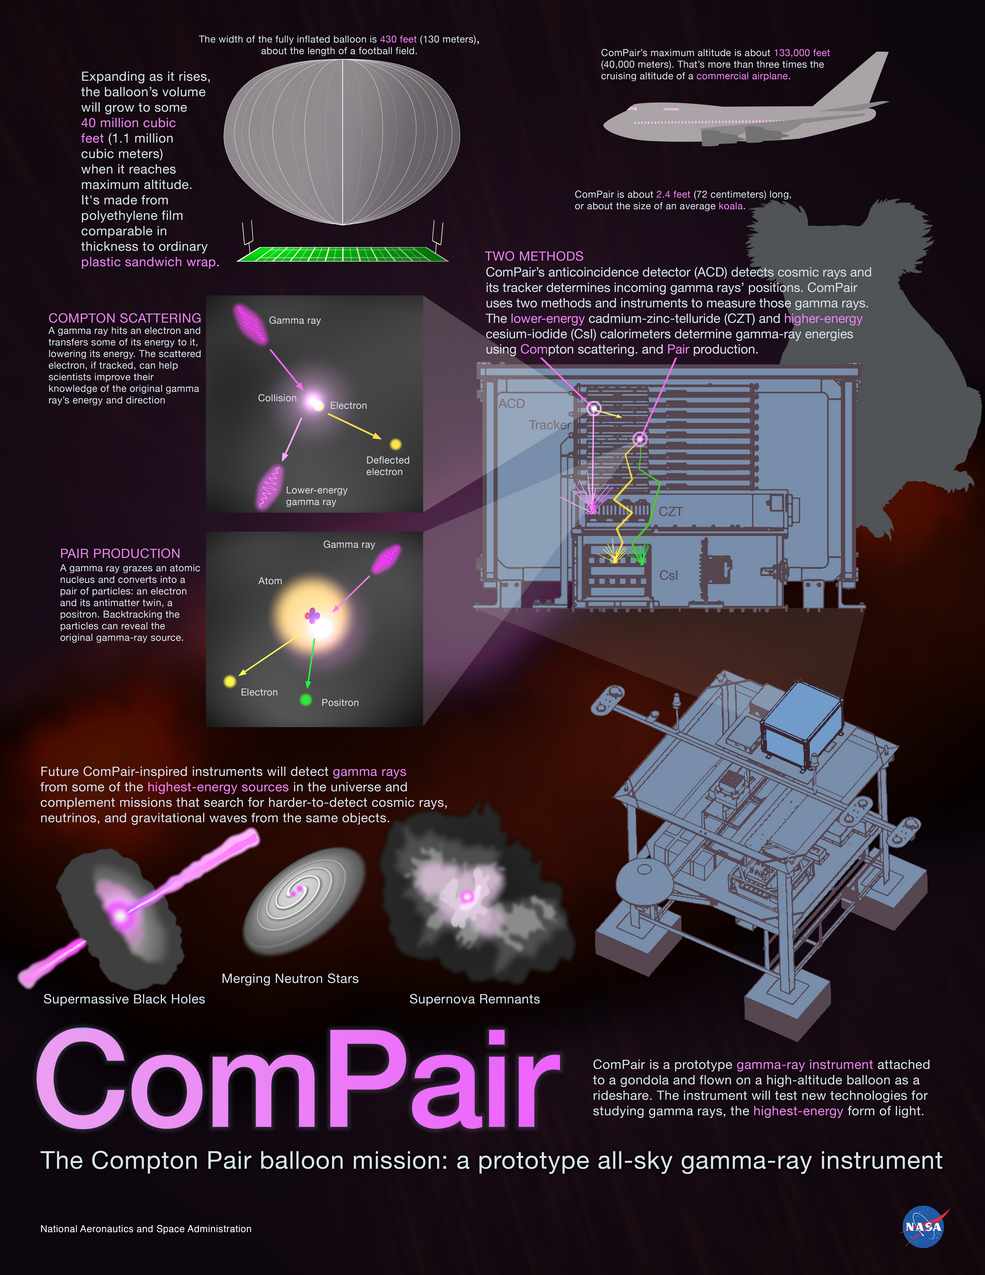 An infographic showing details about the ComPair instrument.